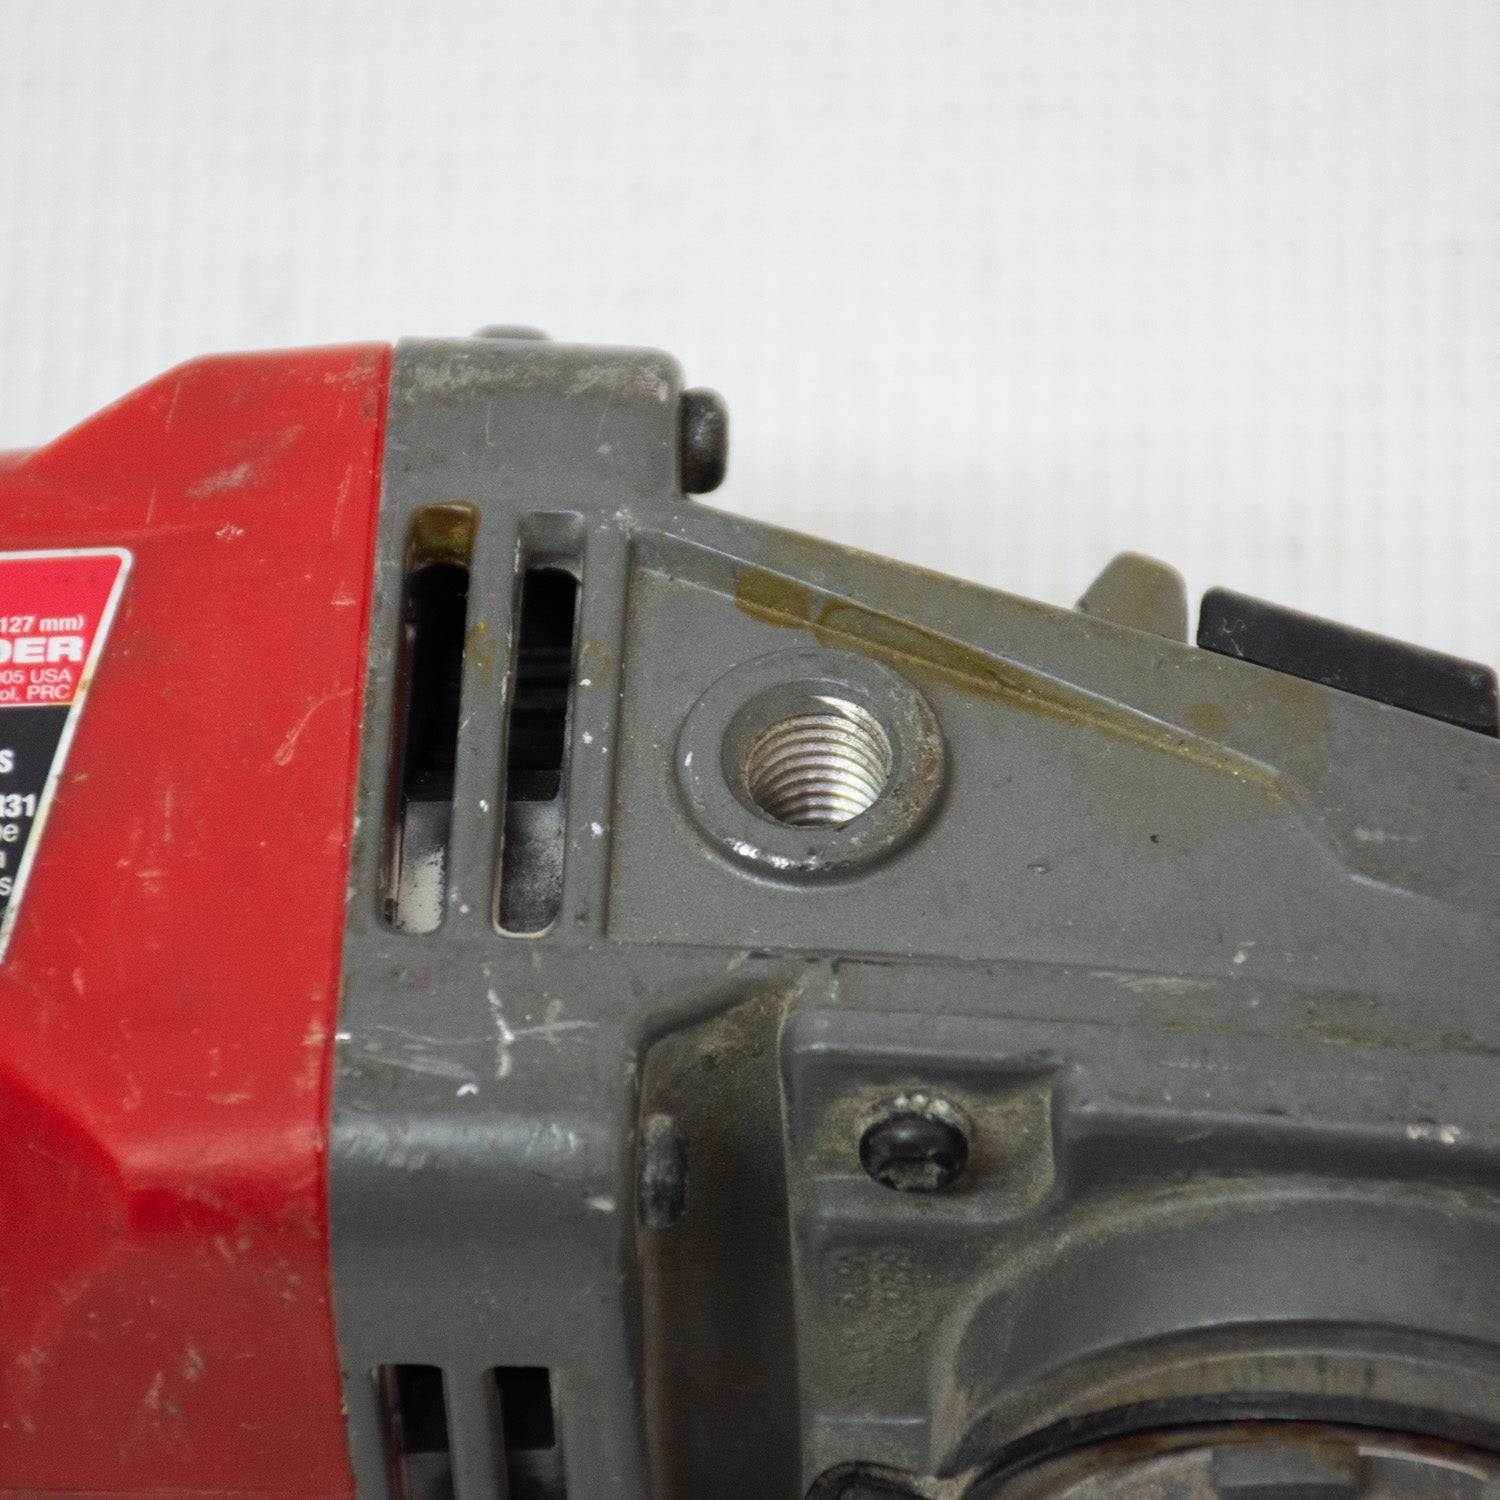 Milwaukee 2780-20 M18 Fuel Right Angle Grinder